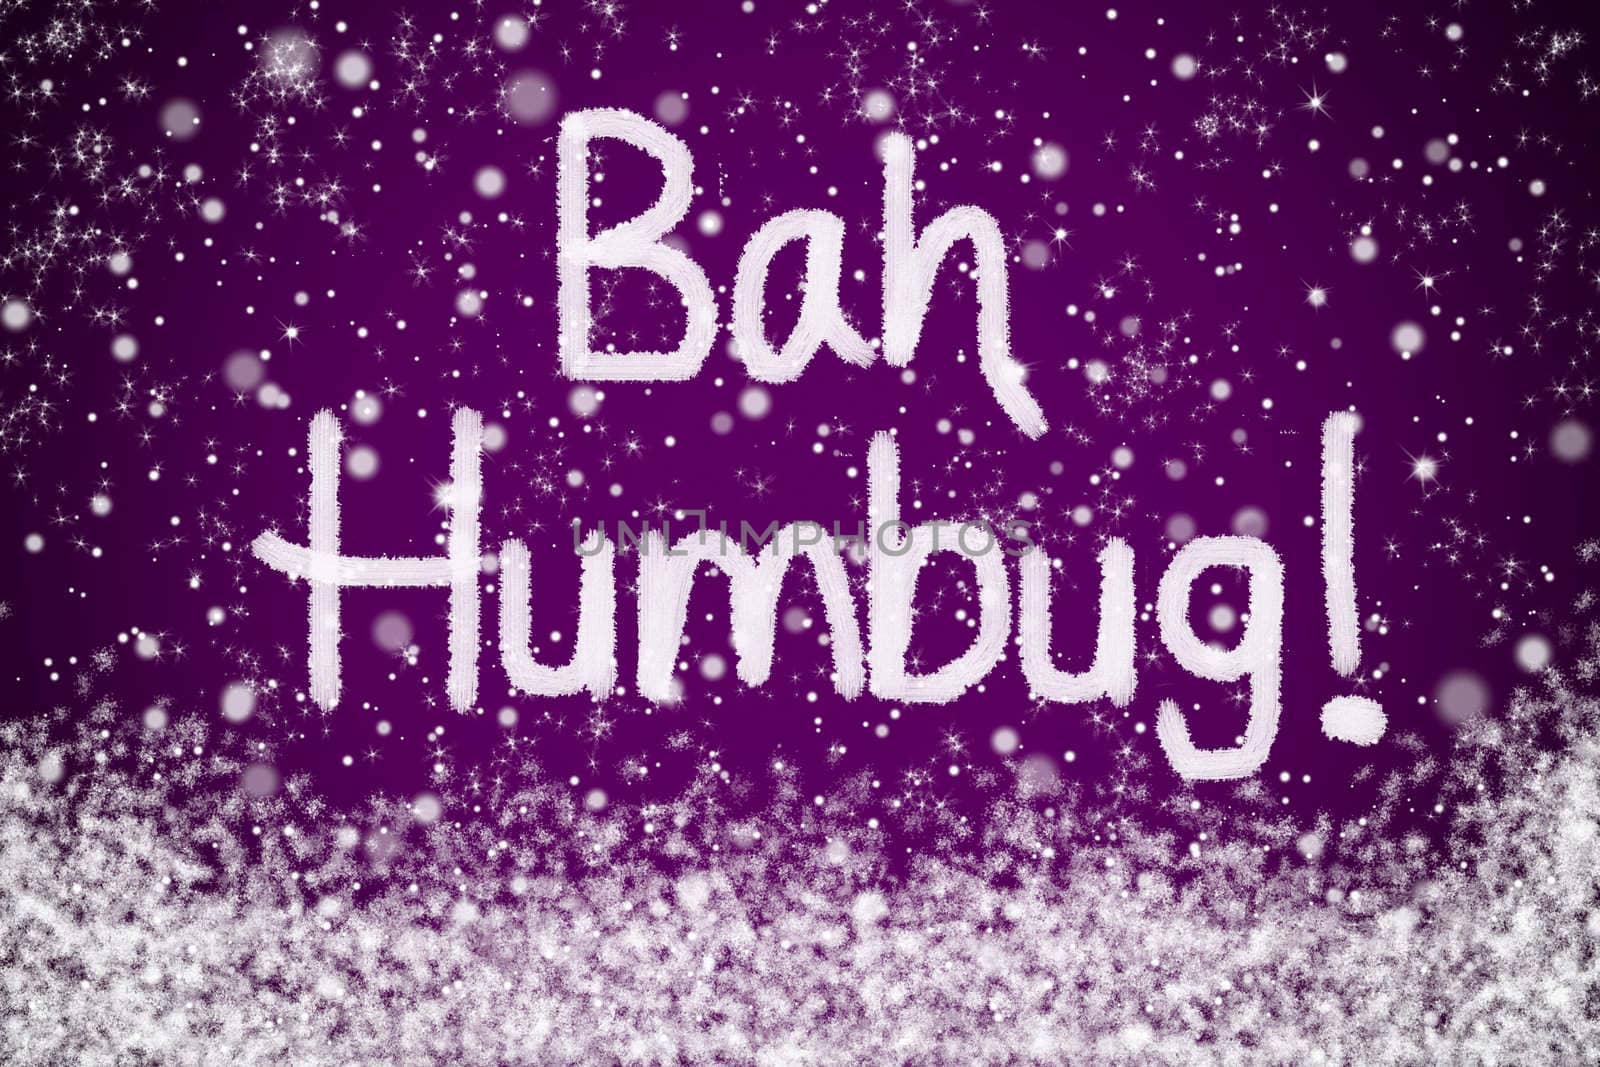 Bah Humbug Christmas Message on Purple Snow Background by scheriton